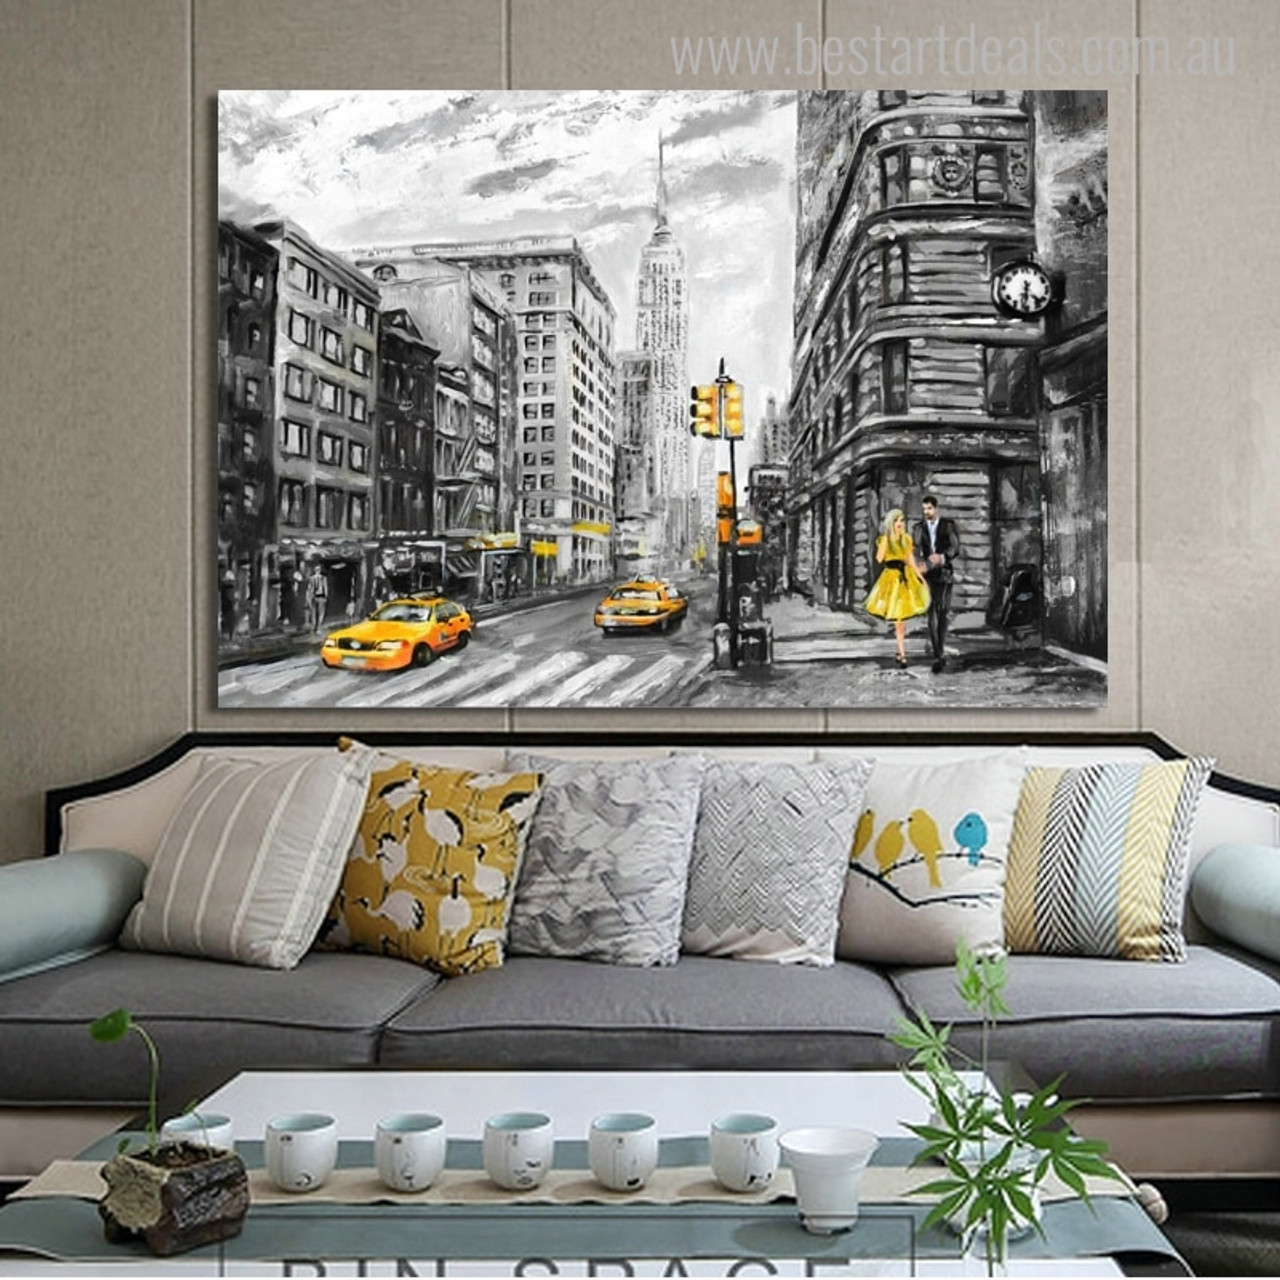 Skyline Art Posters Landscape New York City Skyline Abstract Print Portrait Painting on Canvas,for Living Room and Bedroom 70x100cm no Frame 